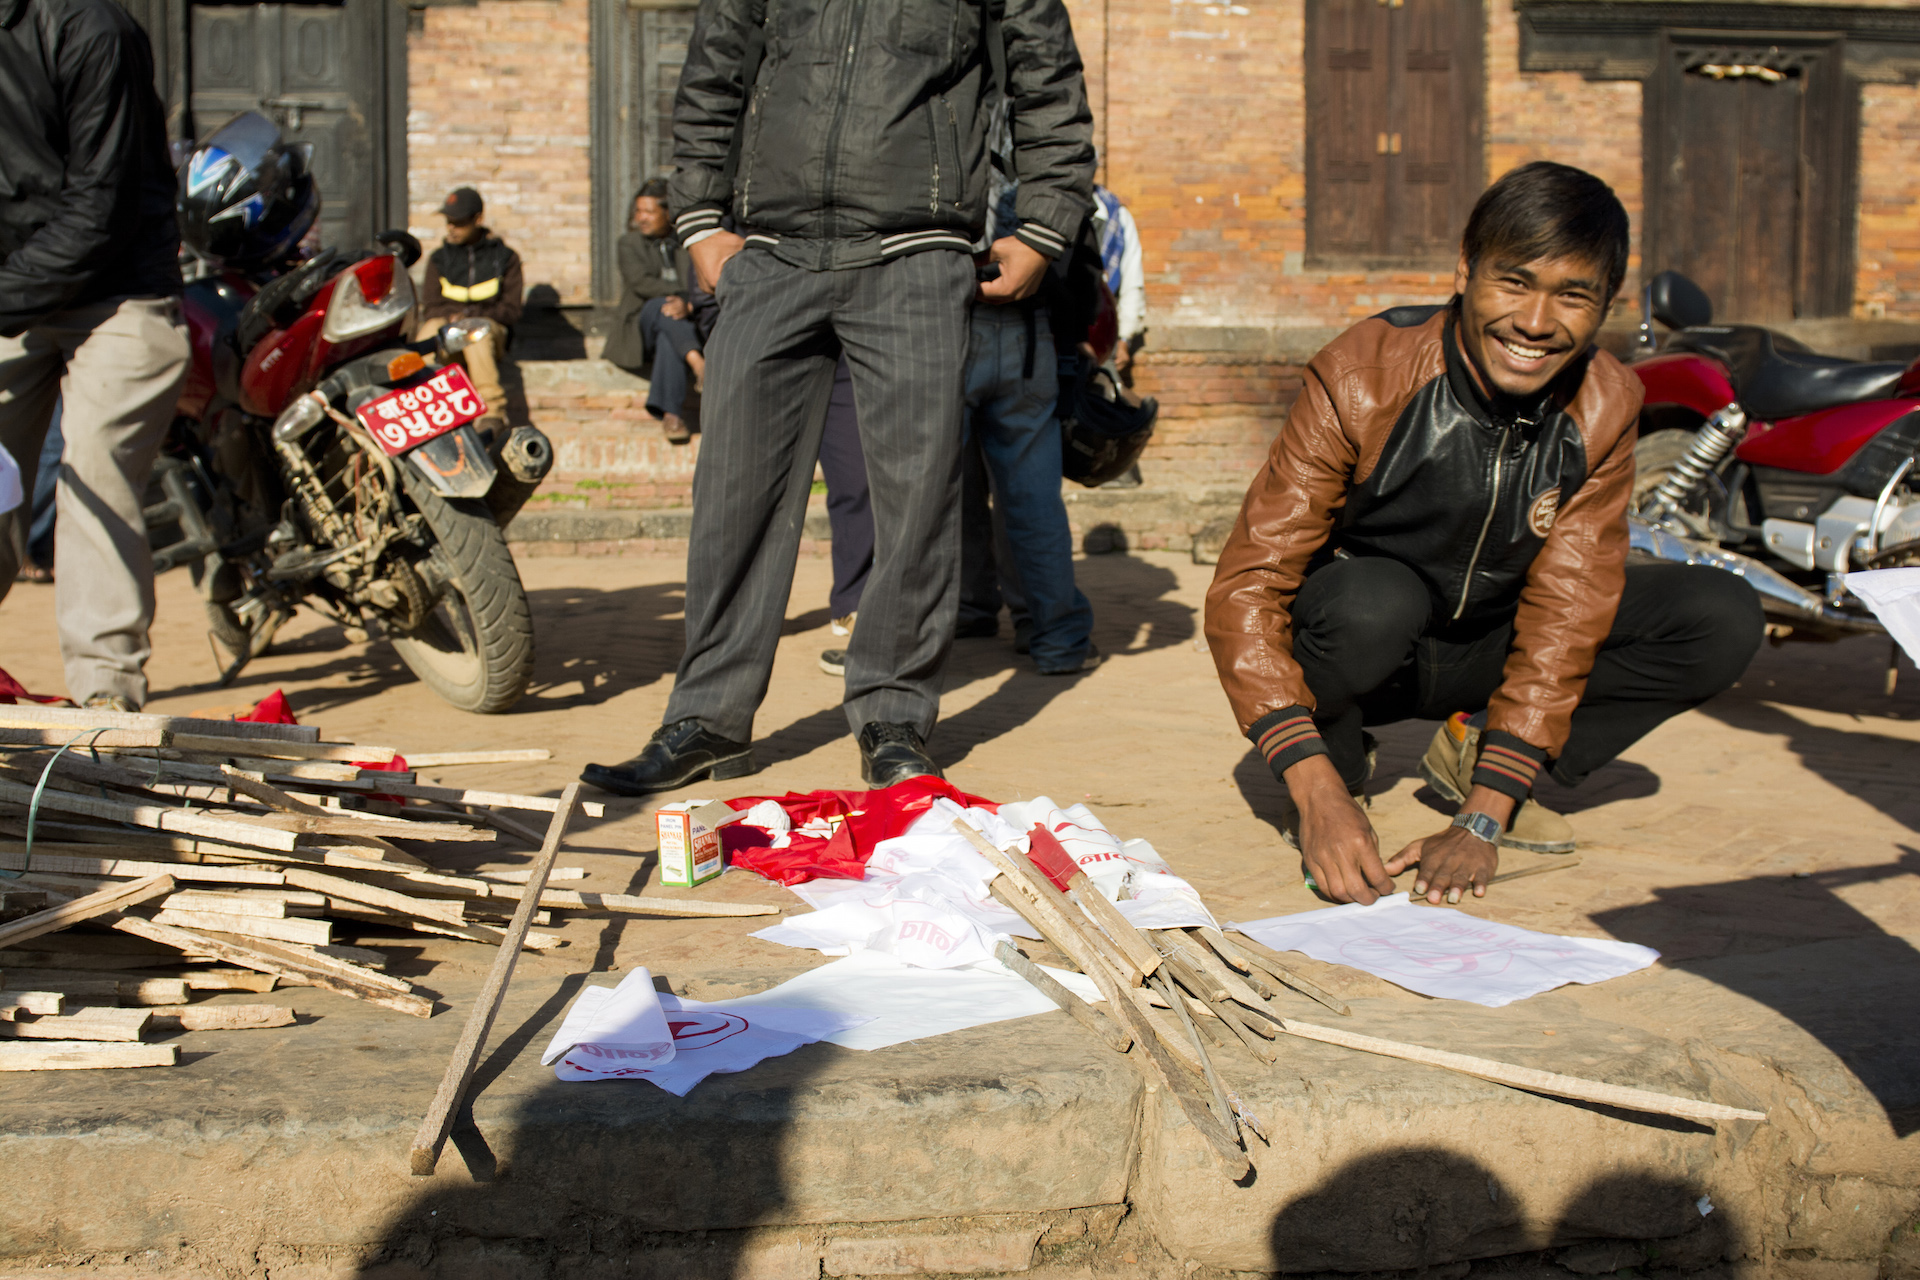 A Nepali man prepares flags for a political rally in Kathmandu. The flags were held up by motorcyclists as they wound through Kathmandu's narrow streets.